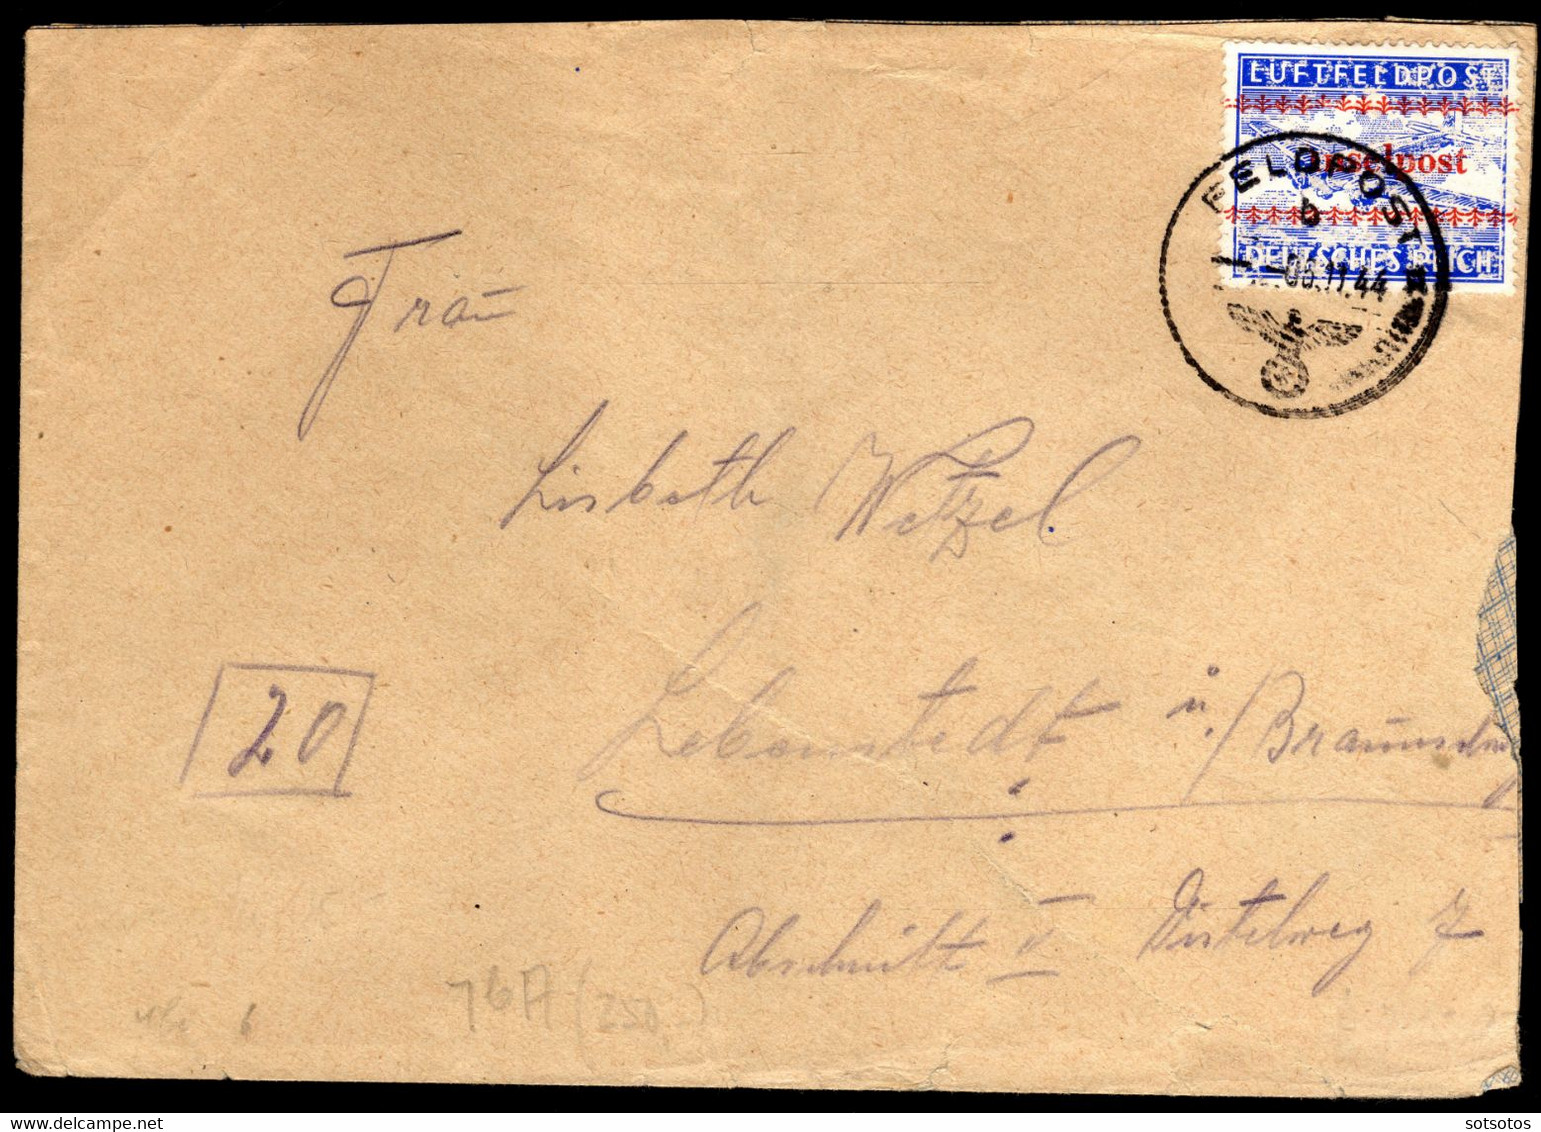 CRETE 5.11.1944: GERMAN OCCUPATION Surcharged INSELPOST German Air Post Stamp On Cover (M #7 - Hellas #1)  Extremely Rar - Crète